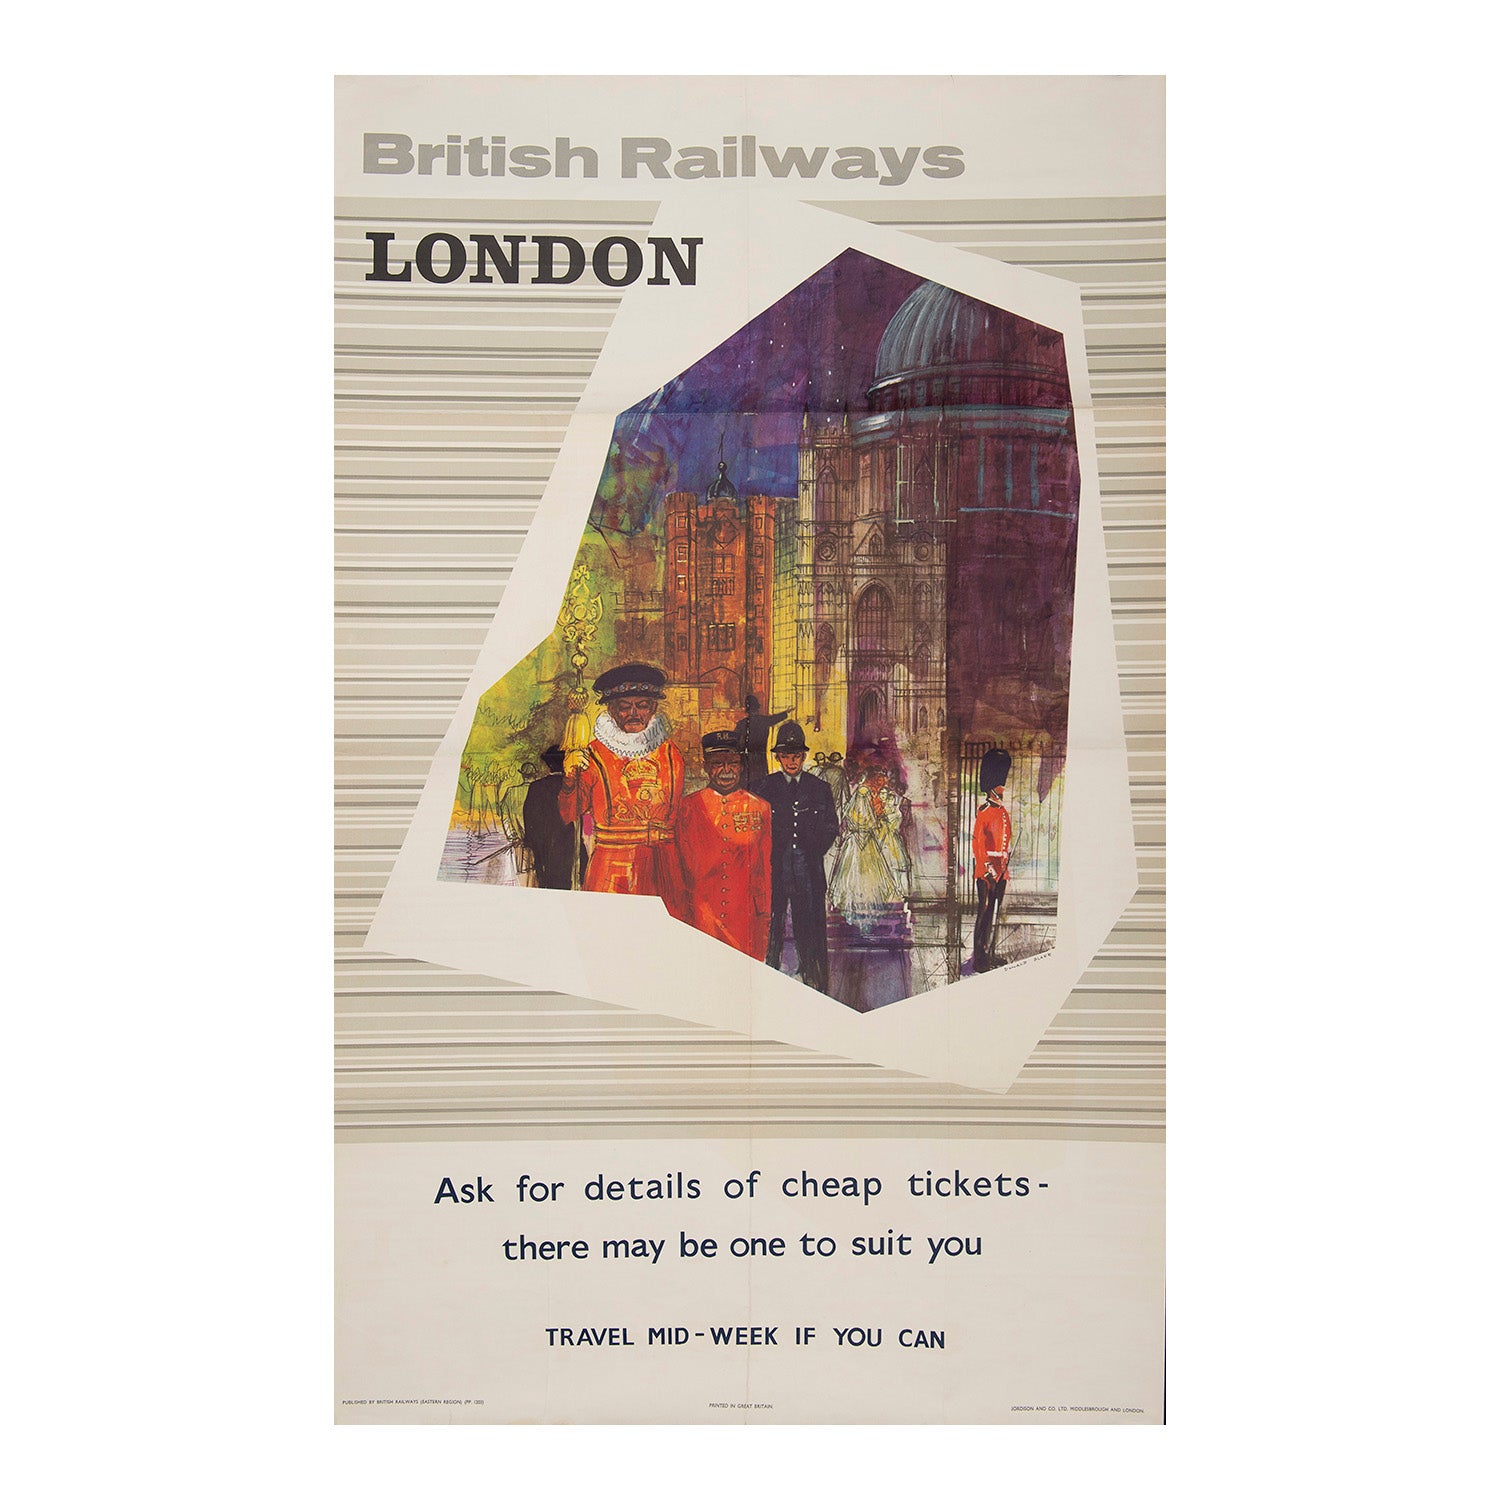 original British Railways (Eastern Region) poster promoting trips to London, designed by Donald Blake, 1964. The poster, executed in a modern style, depicts London landmarks St Paul's Cathedral, St James's Palace and Westminster Abbey, with a Yeoman Warder, Chelsea Pensioner, Policeman and Guardsman in the foreground